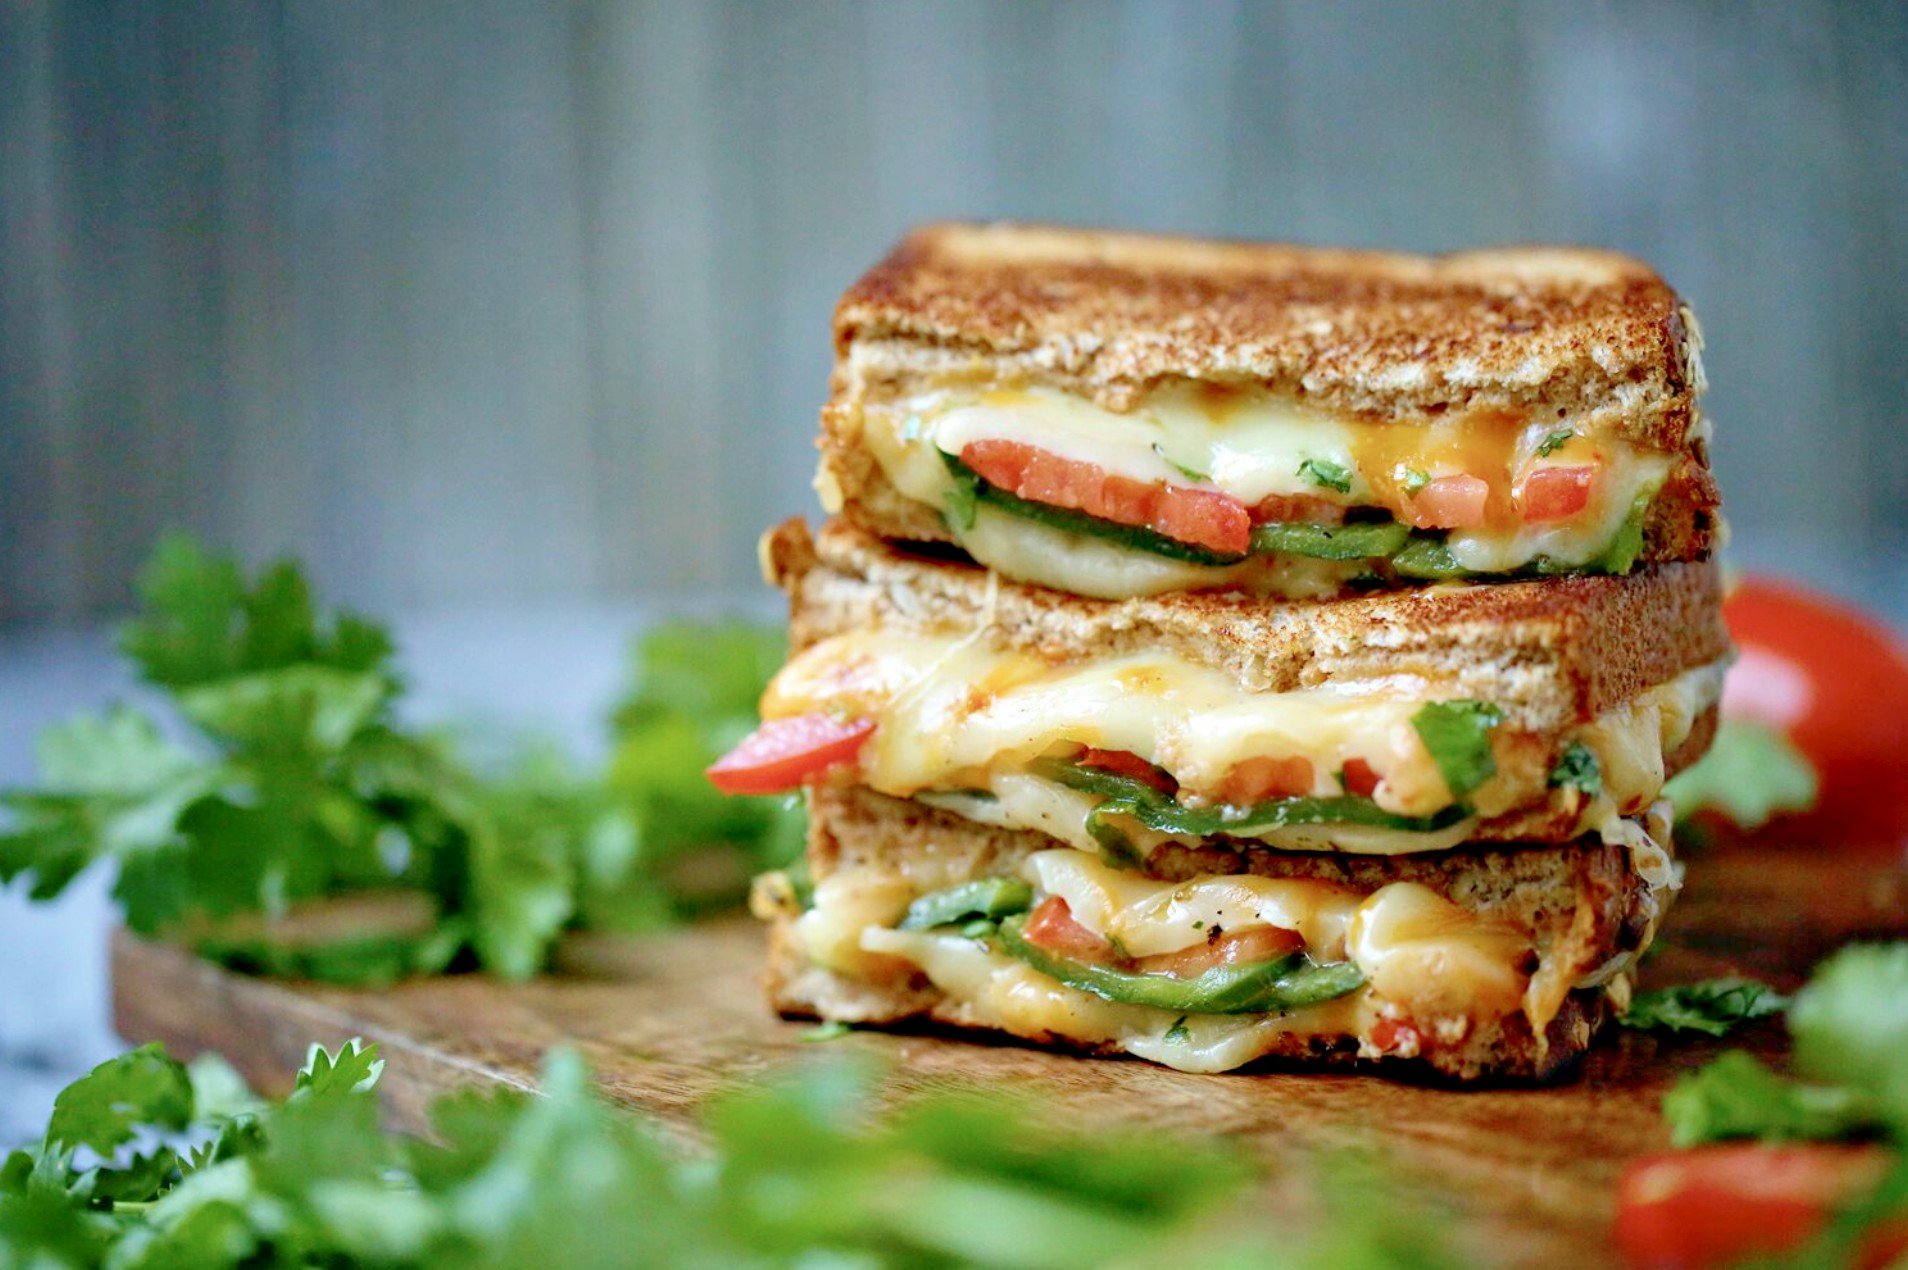 What goes best with a homemade soup? An ooey gooey grilled cheese sandwich, of course! Try my recipe for Southwest Grilled Cheese Sandwiches that you and your family will love! Get the recipe @ www.hipmamasplace.com today! #Sargento #Ad